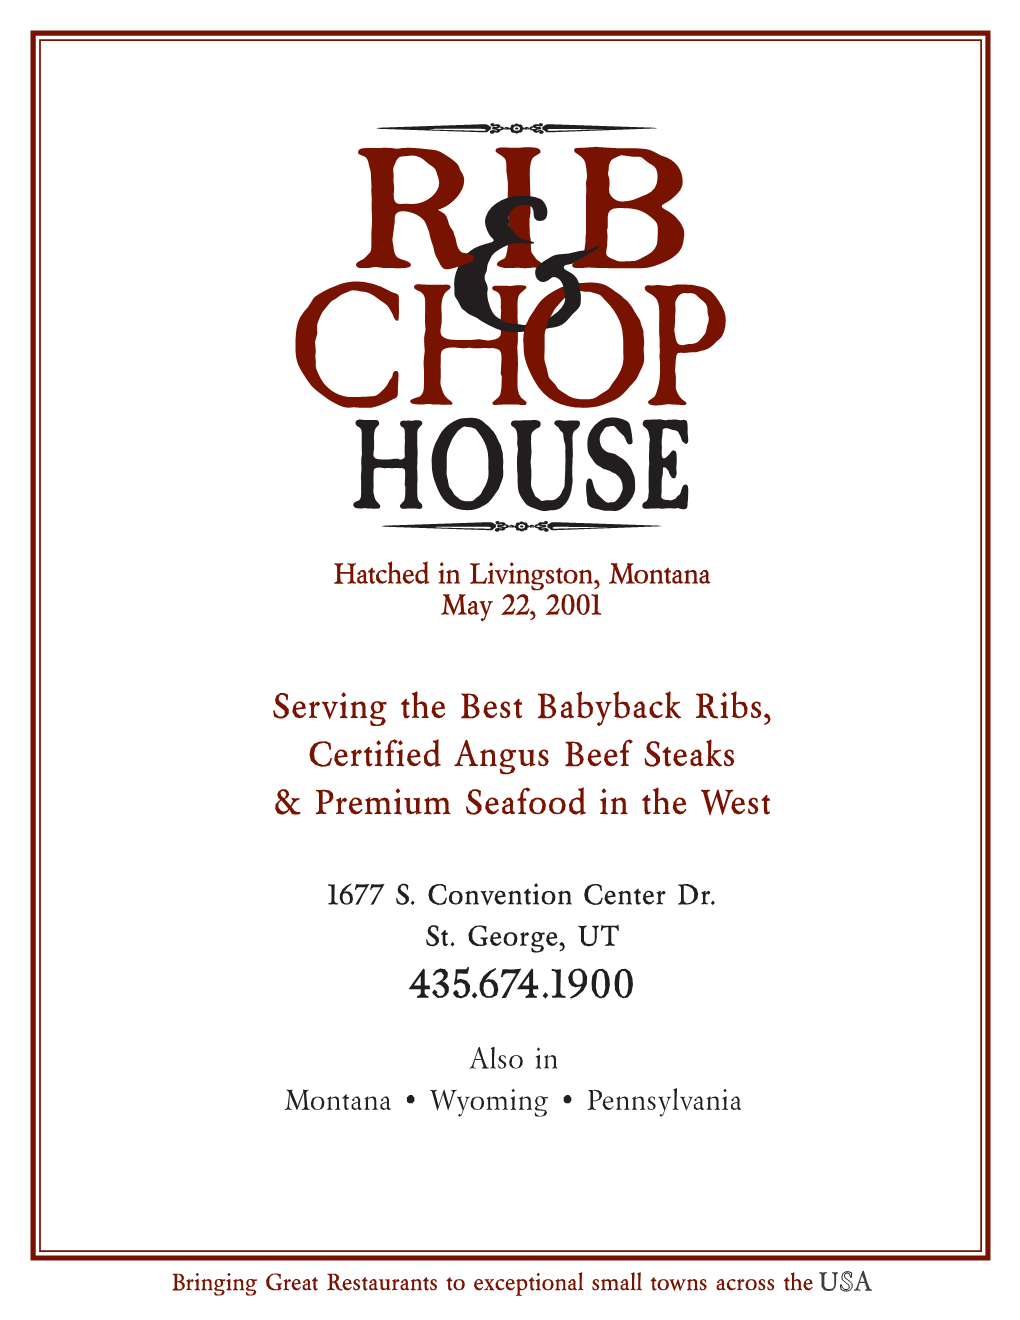 Serving the Best Babyback Ribs, Certified Angus Beef Steaks & Premium Seafood in the West